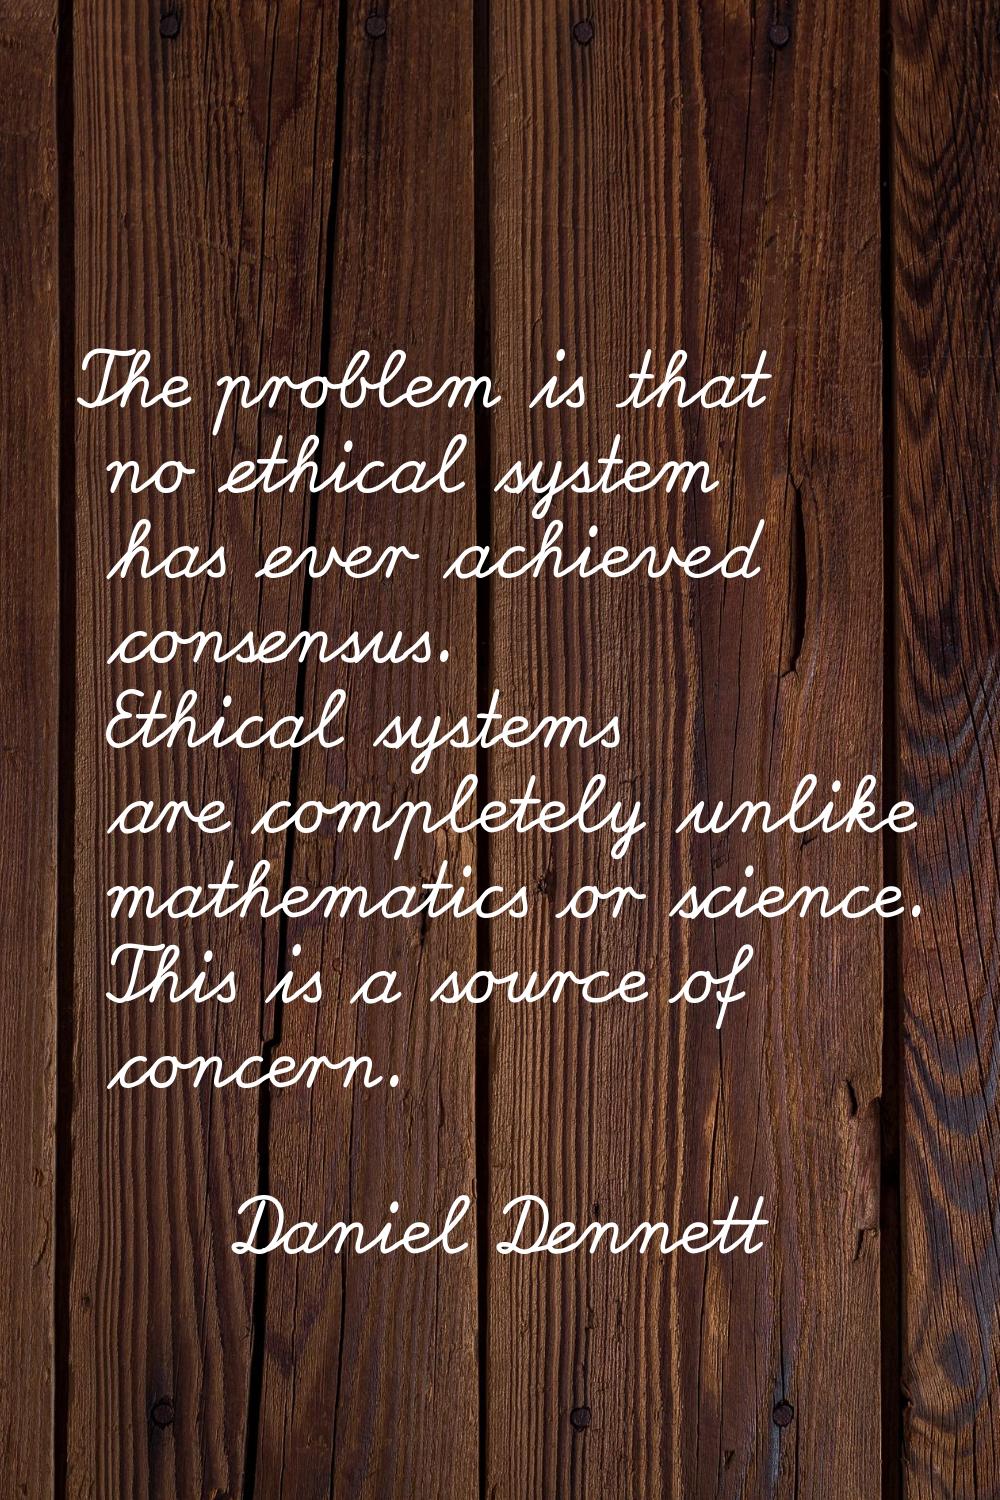 The problem is that no ethical system has ever achieved consensus. Ethical systems are completely u